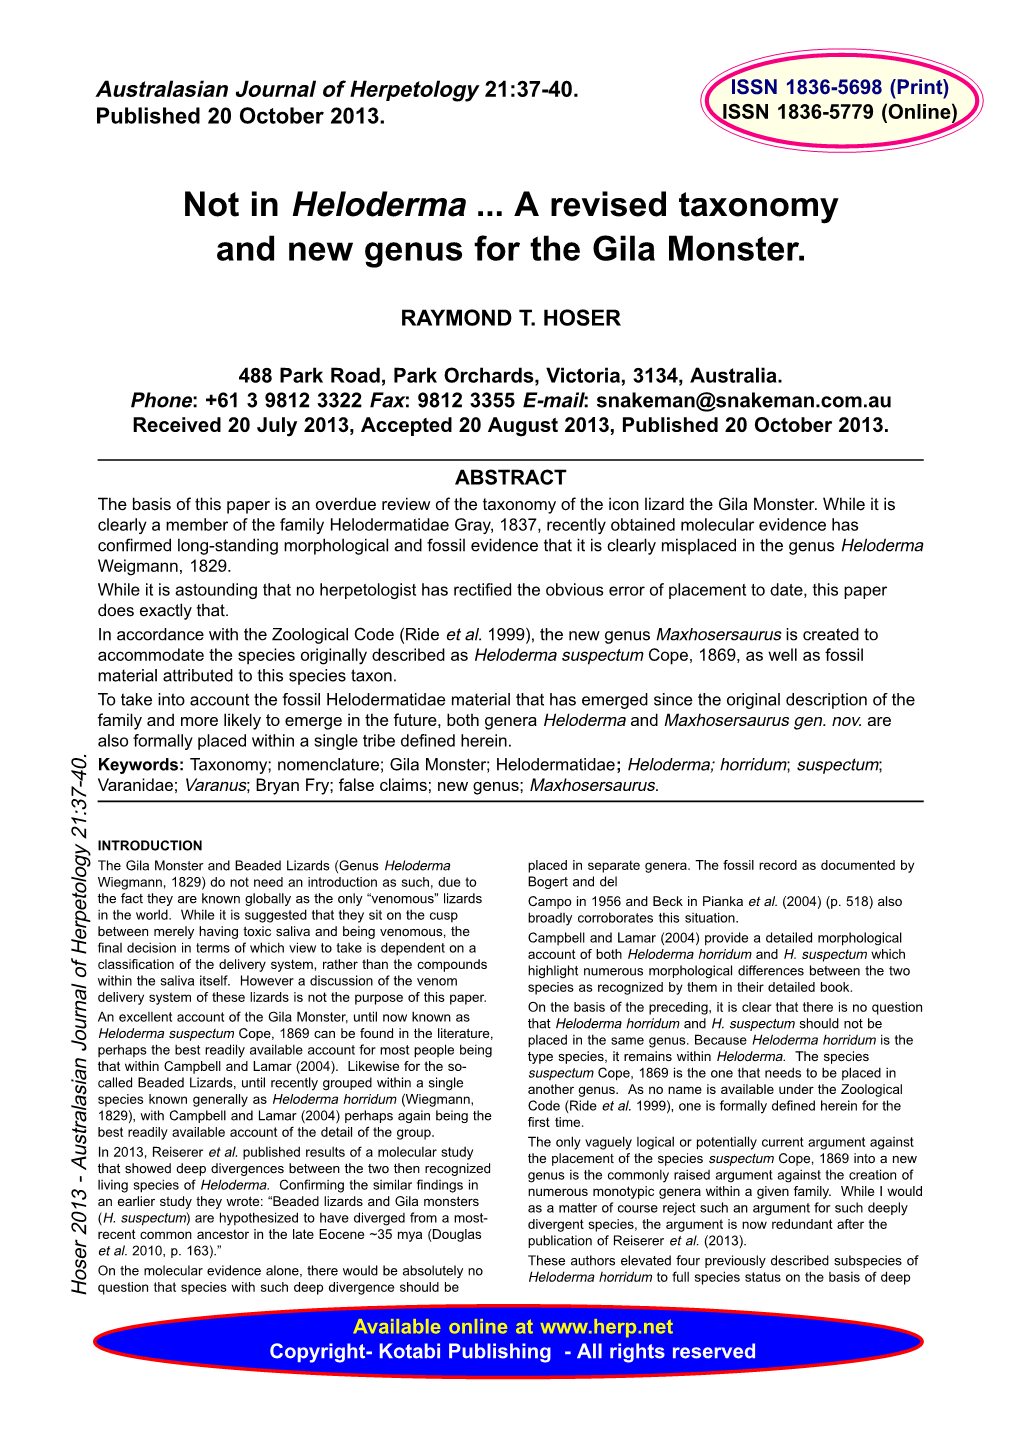 Not in Heloderma ... a Revised Taxonomy and New Genus for the Gila Monster